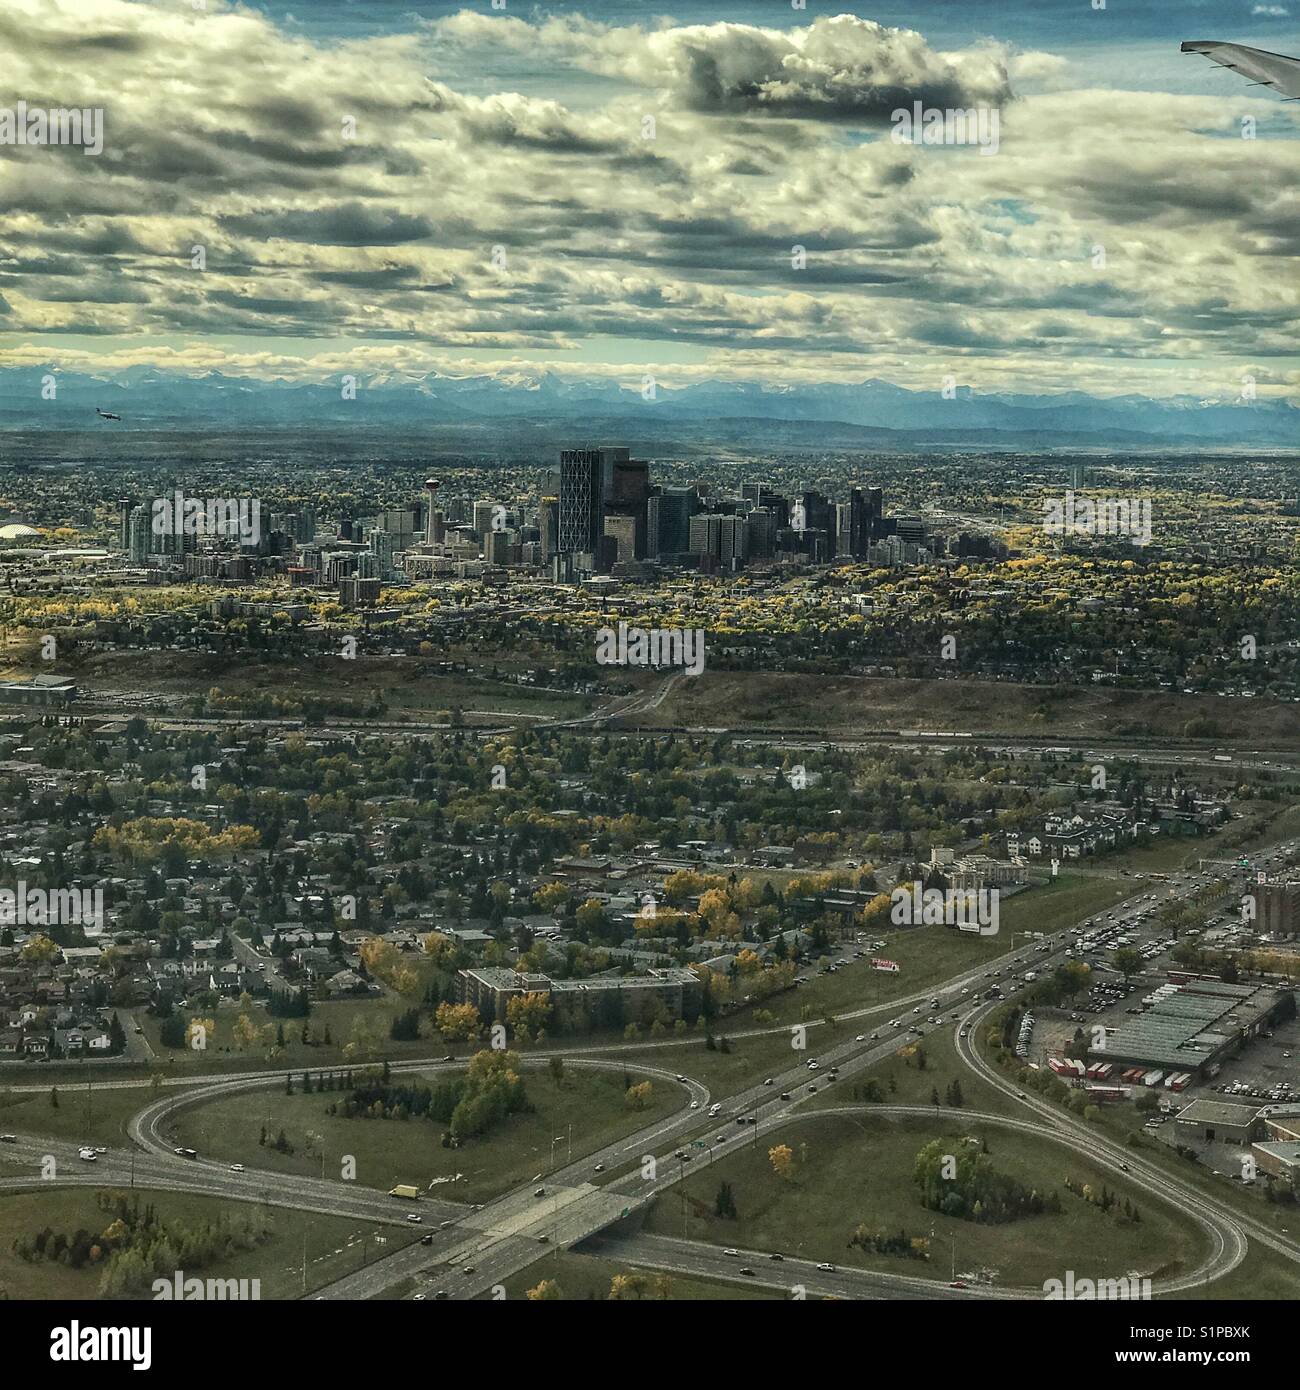 Downtown core of the city of Calgary, with Rocky mountains in the background, as viewed from a plane about to land. Alberta, Canada. Stock Photo